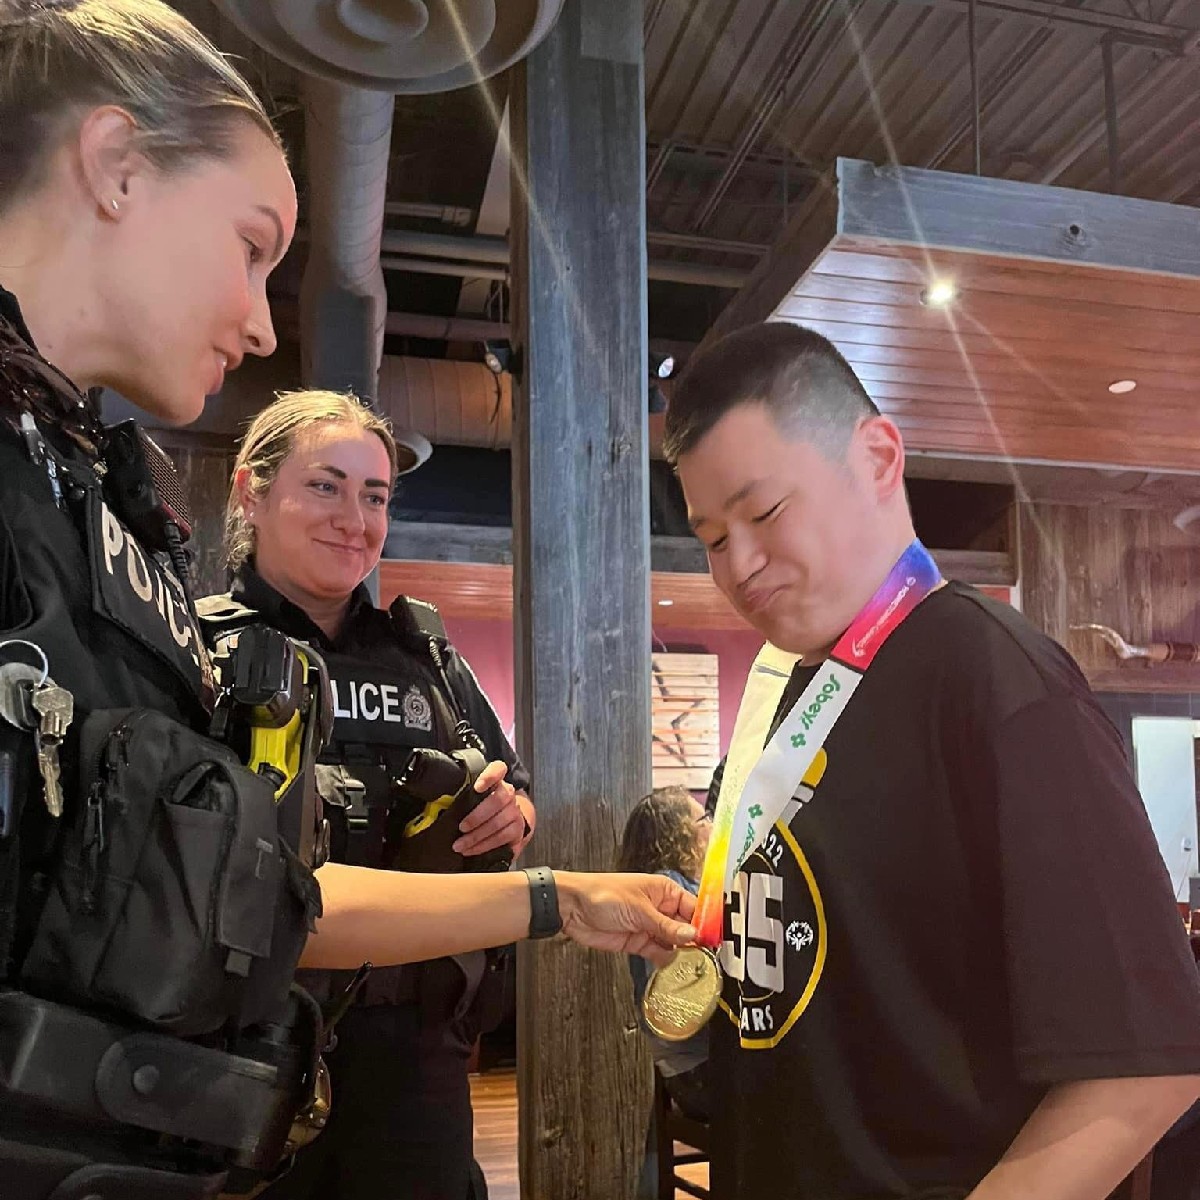 📸 Last night, during Cops n' Cowboys @SOOntario athlete Cameron was proud to show off his gold medal 🏅 to members of the @lpsmediaoffice. Thank you @torchrunontario for your dedication to supporting our @SpecialOlympics athletes. #Letrforso #InclusionRevolution